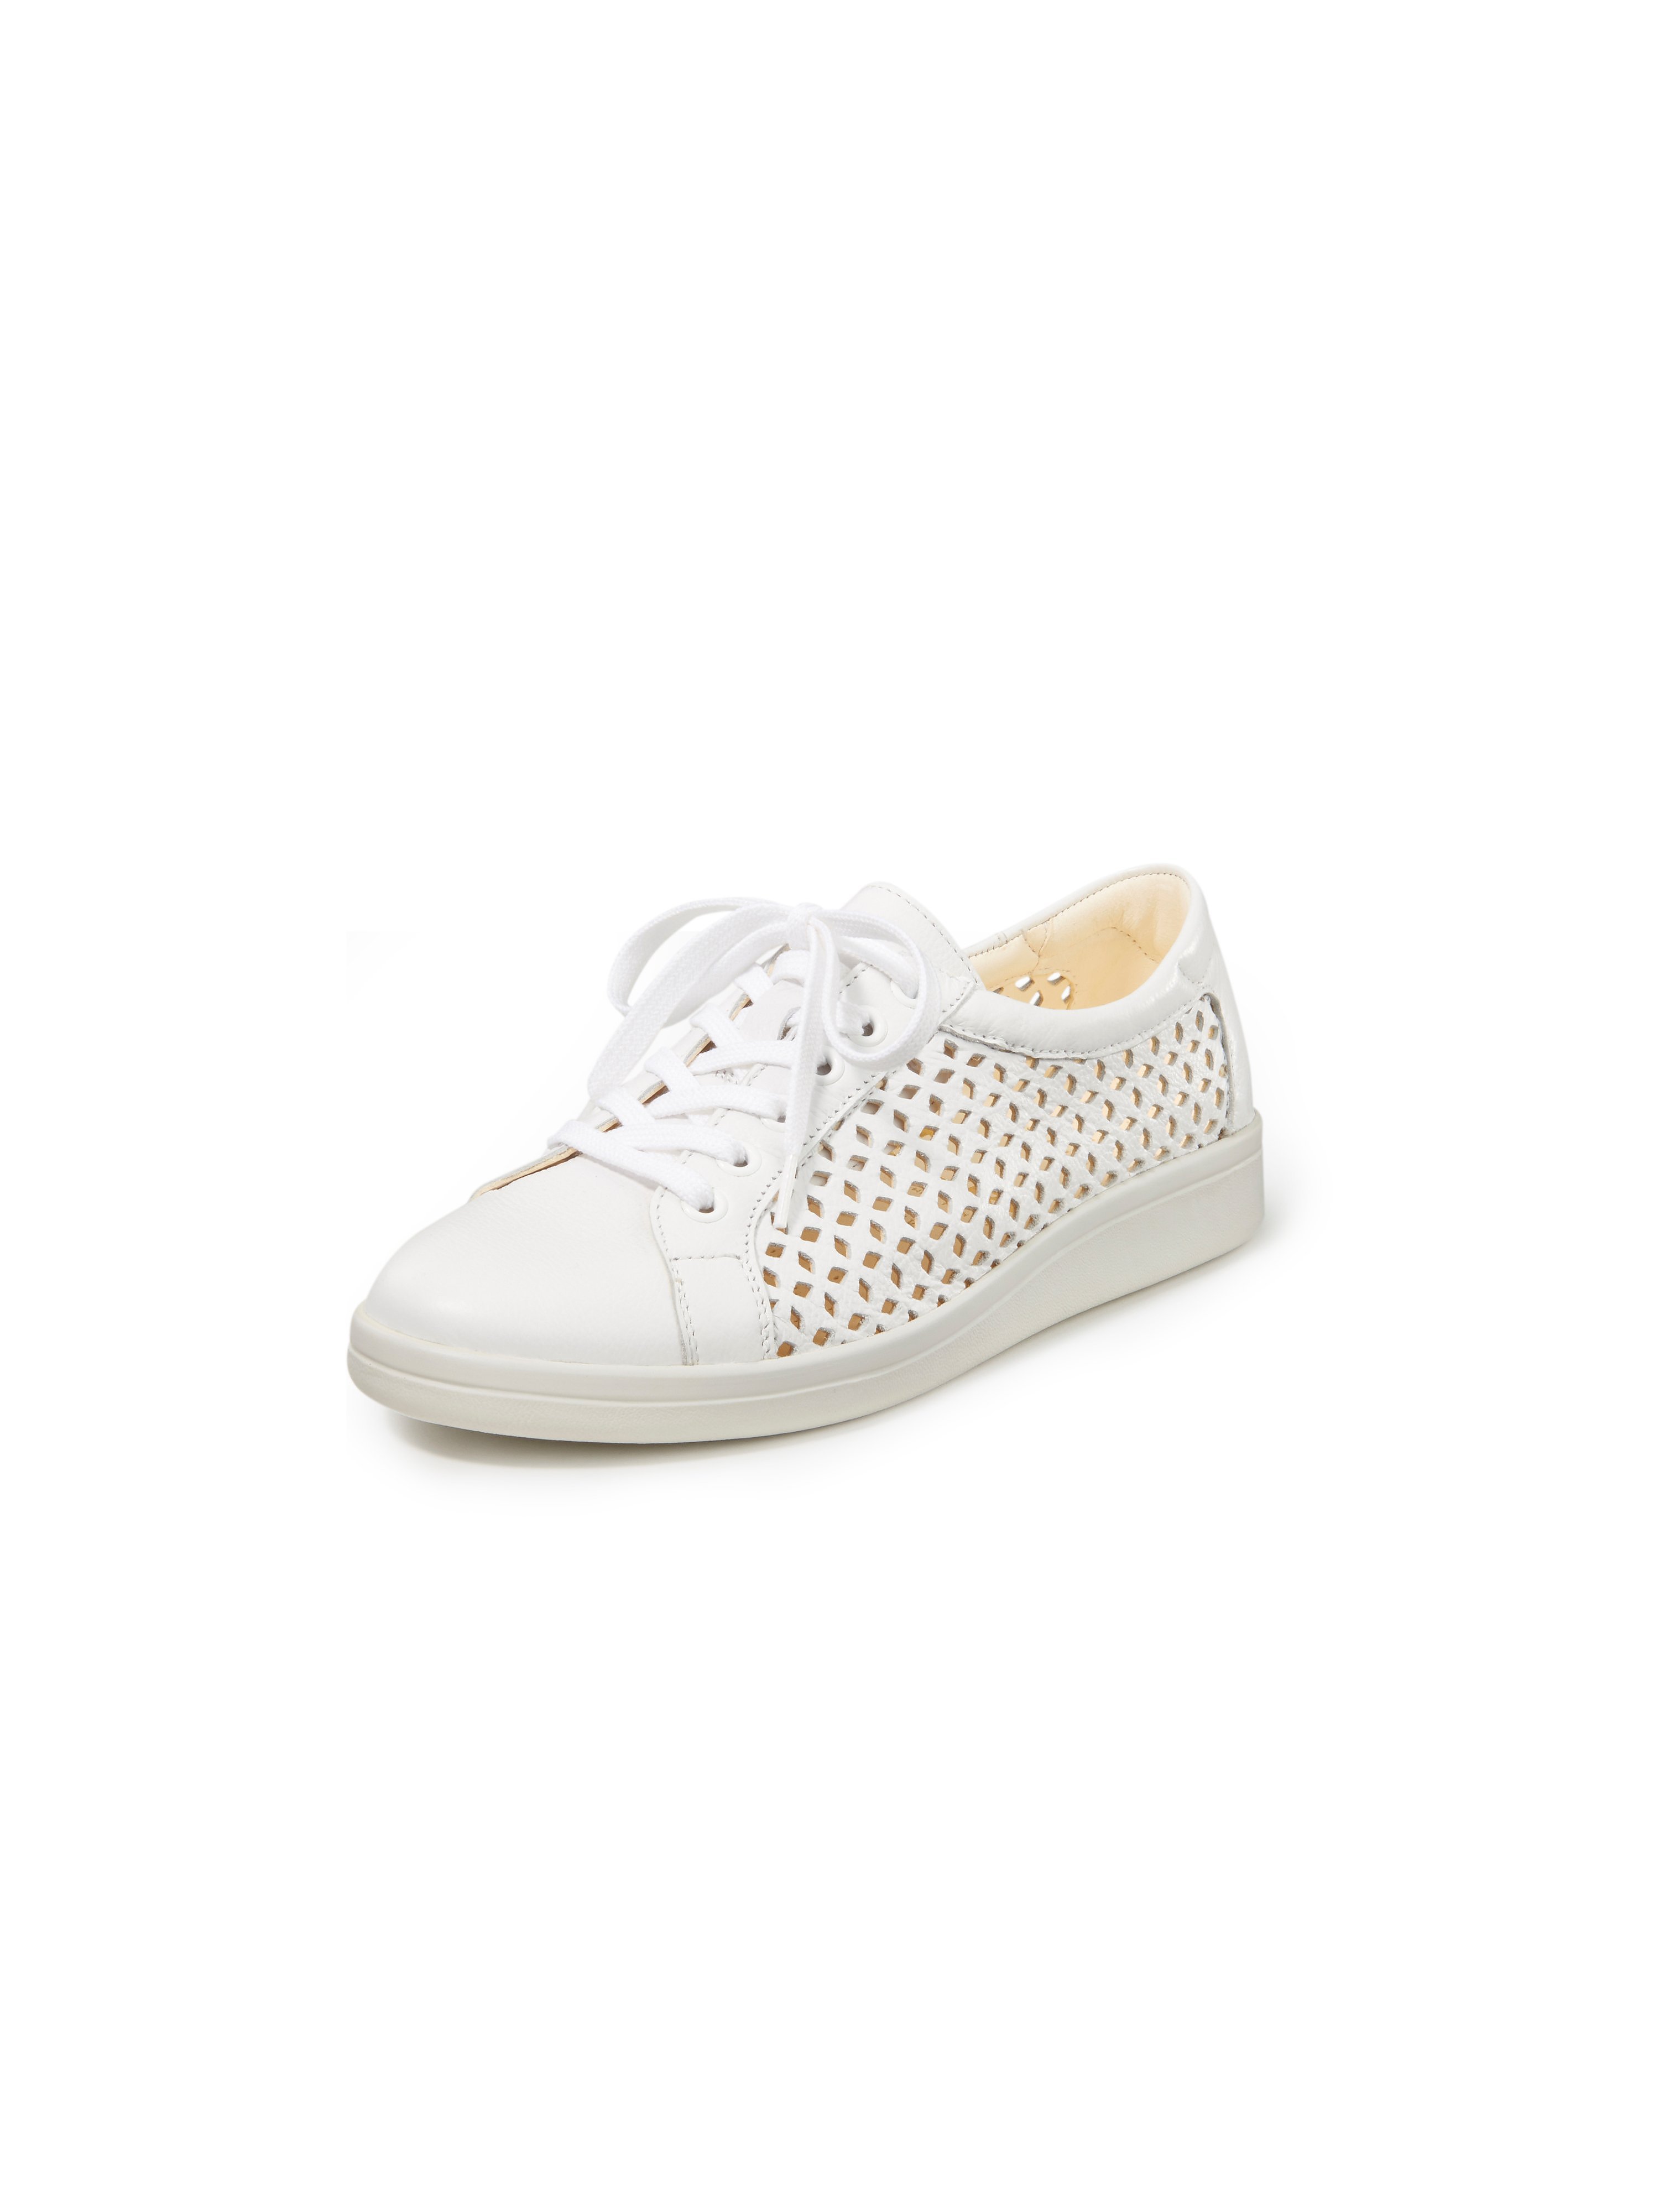 Les sneakers cuir nappa veau  Christian Dietz blanc taille 40